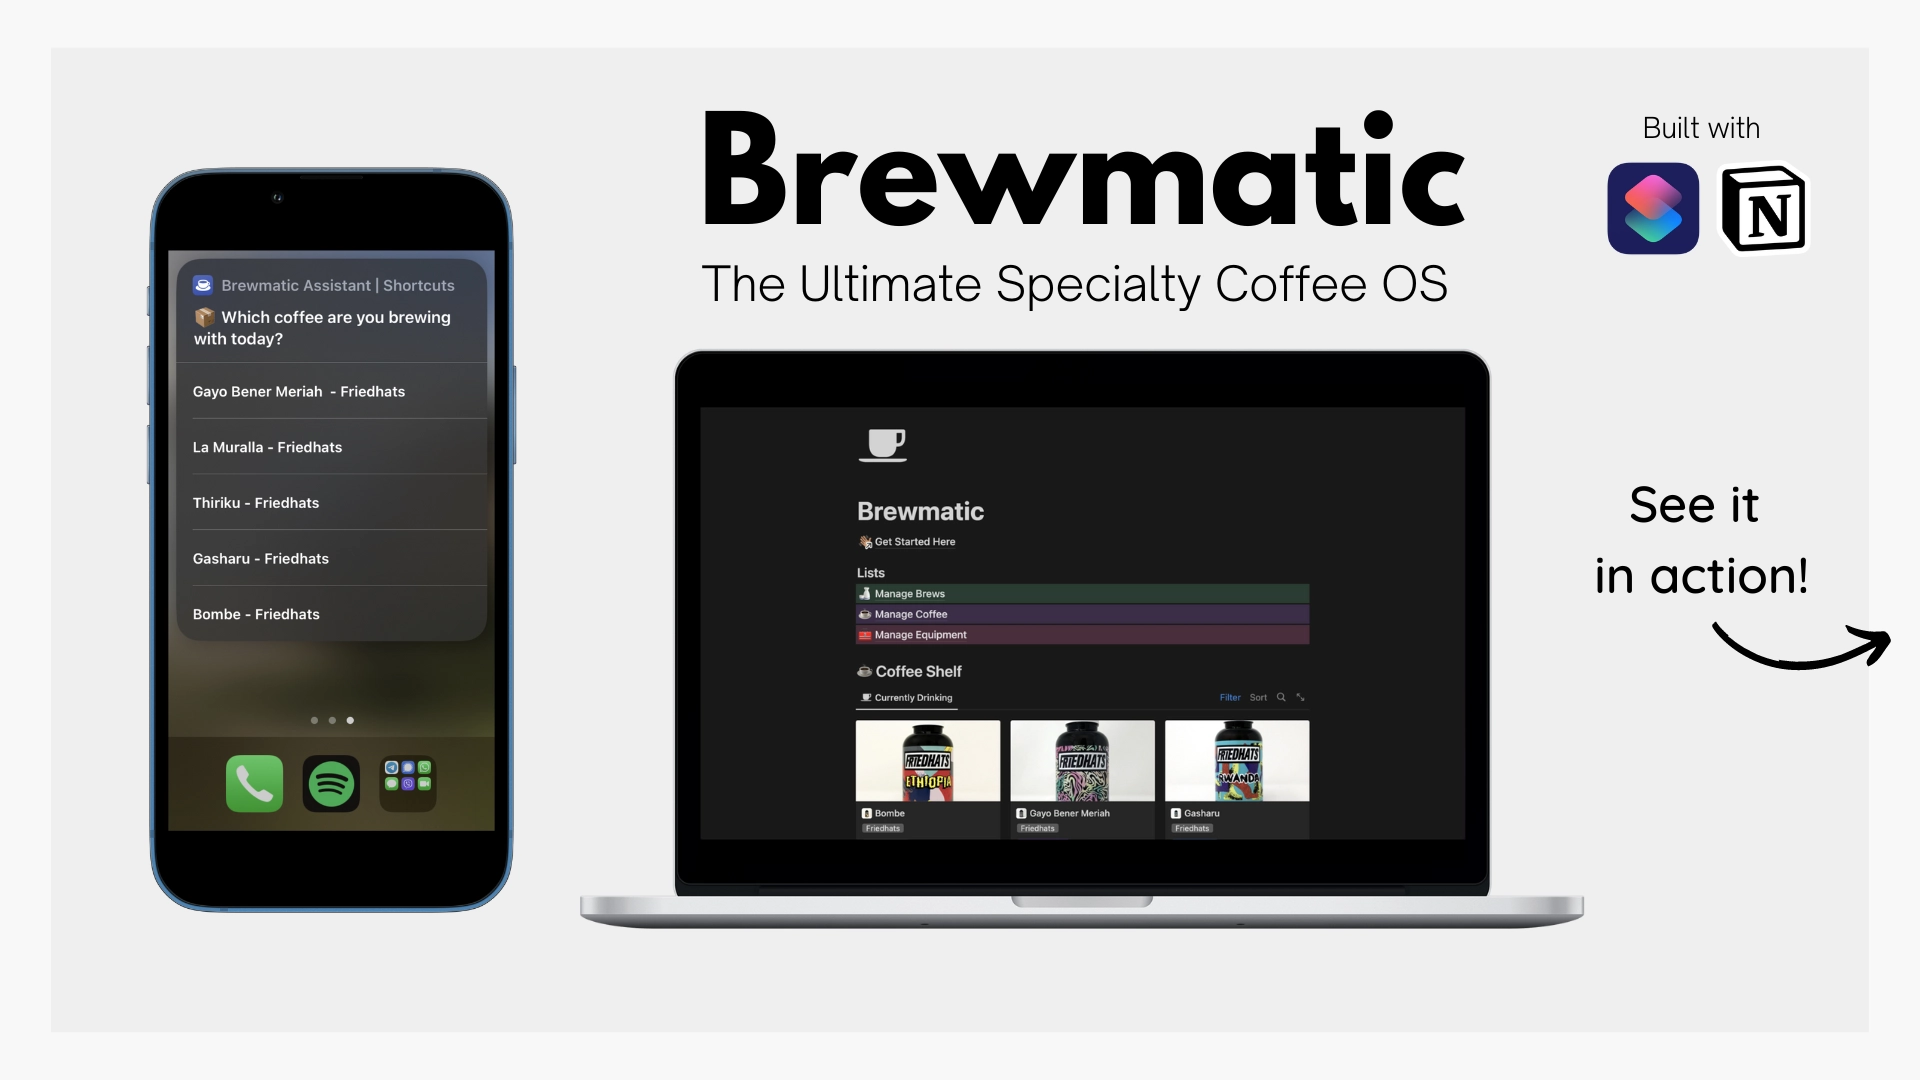 Brewmatic - The Ultimate Specialty Coffee OS